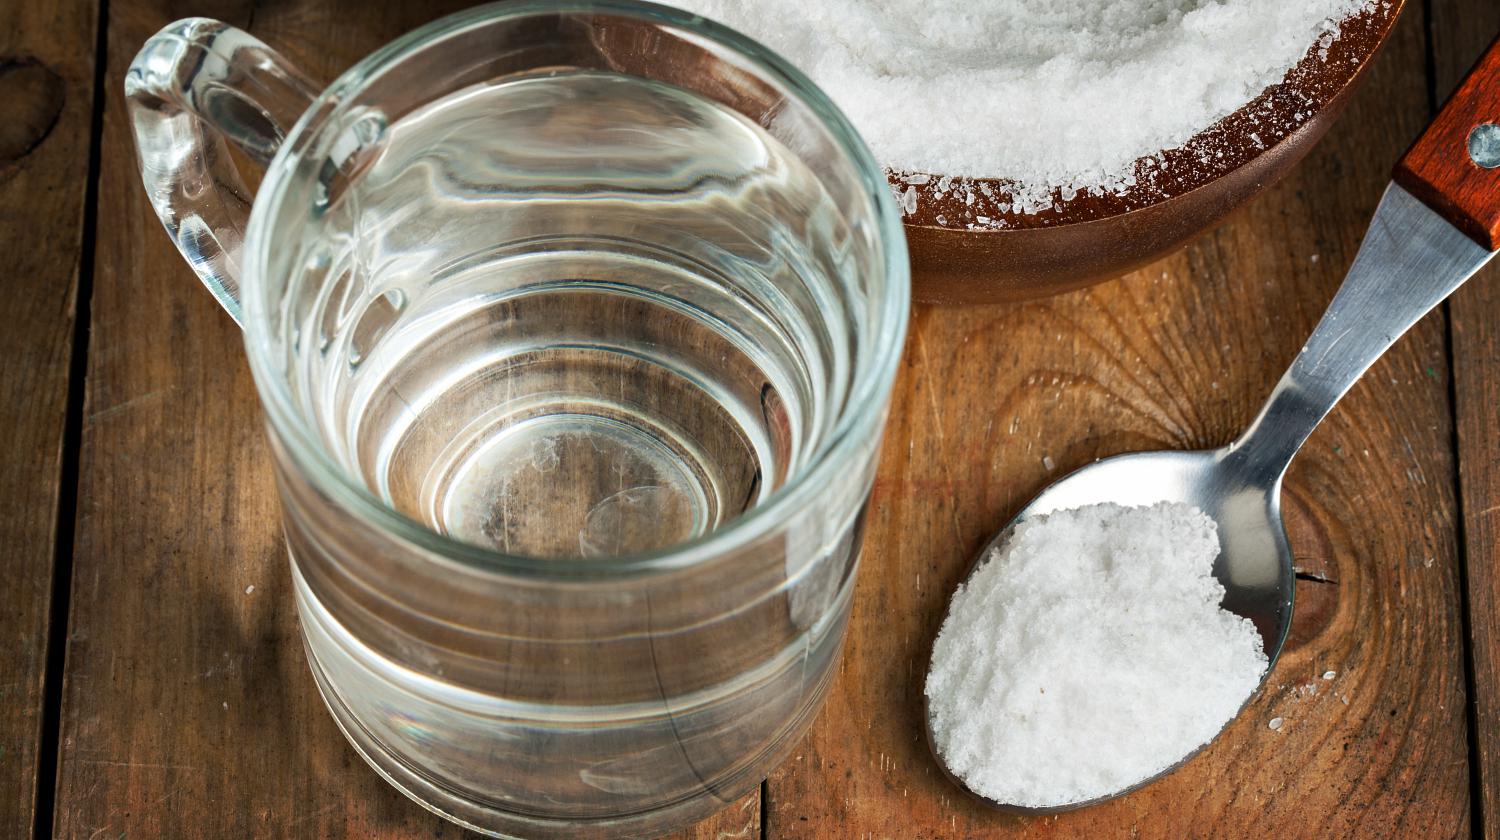 Feature | Spoon of salt, sugar, soda with glass of water | How To Build A Salt Water Distiller | Survival Life Guide